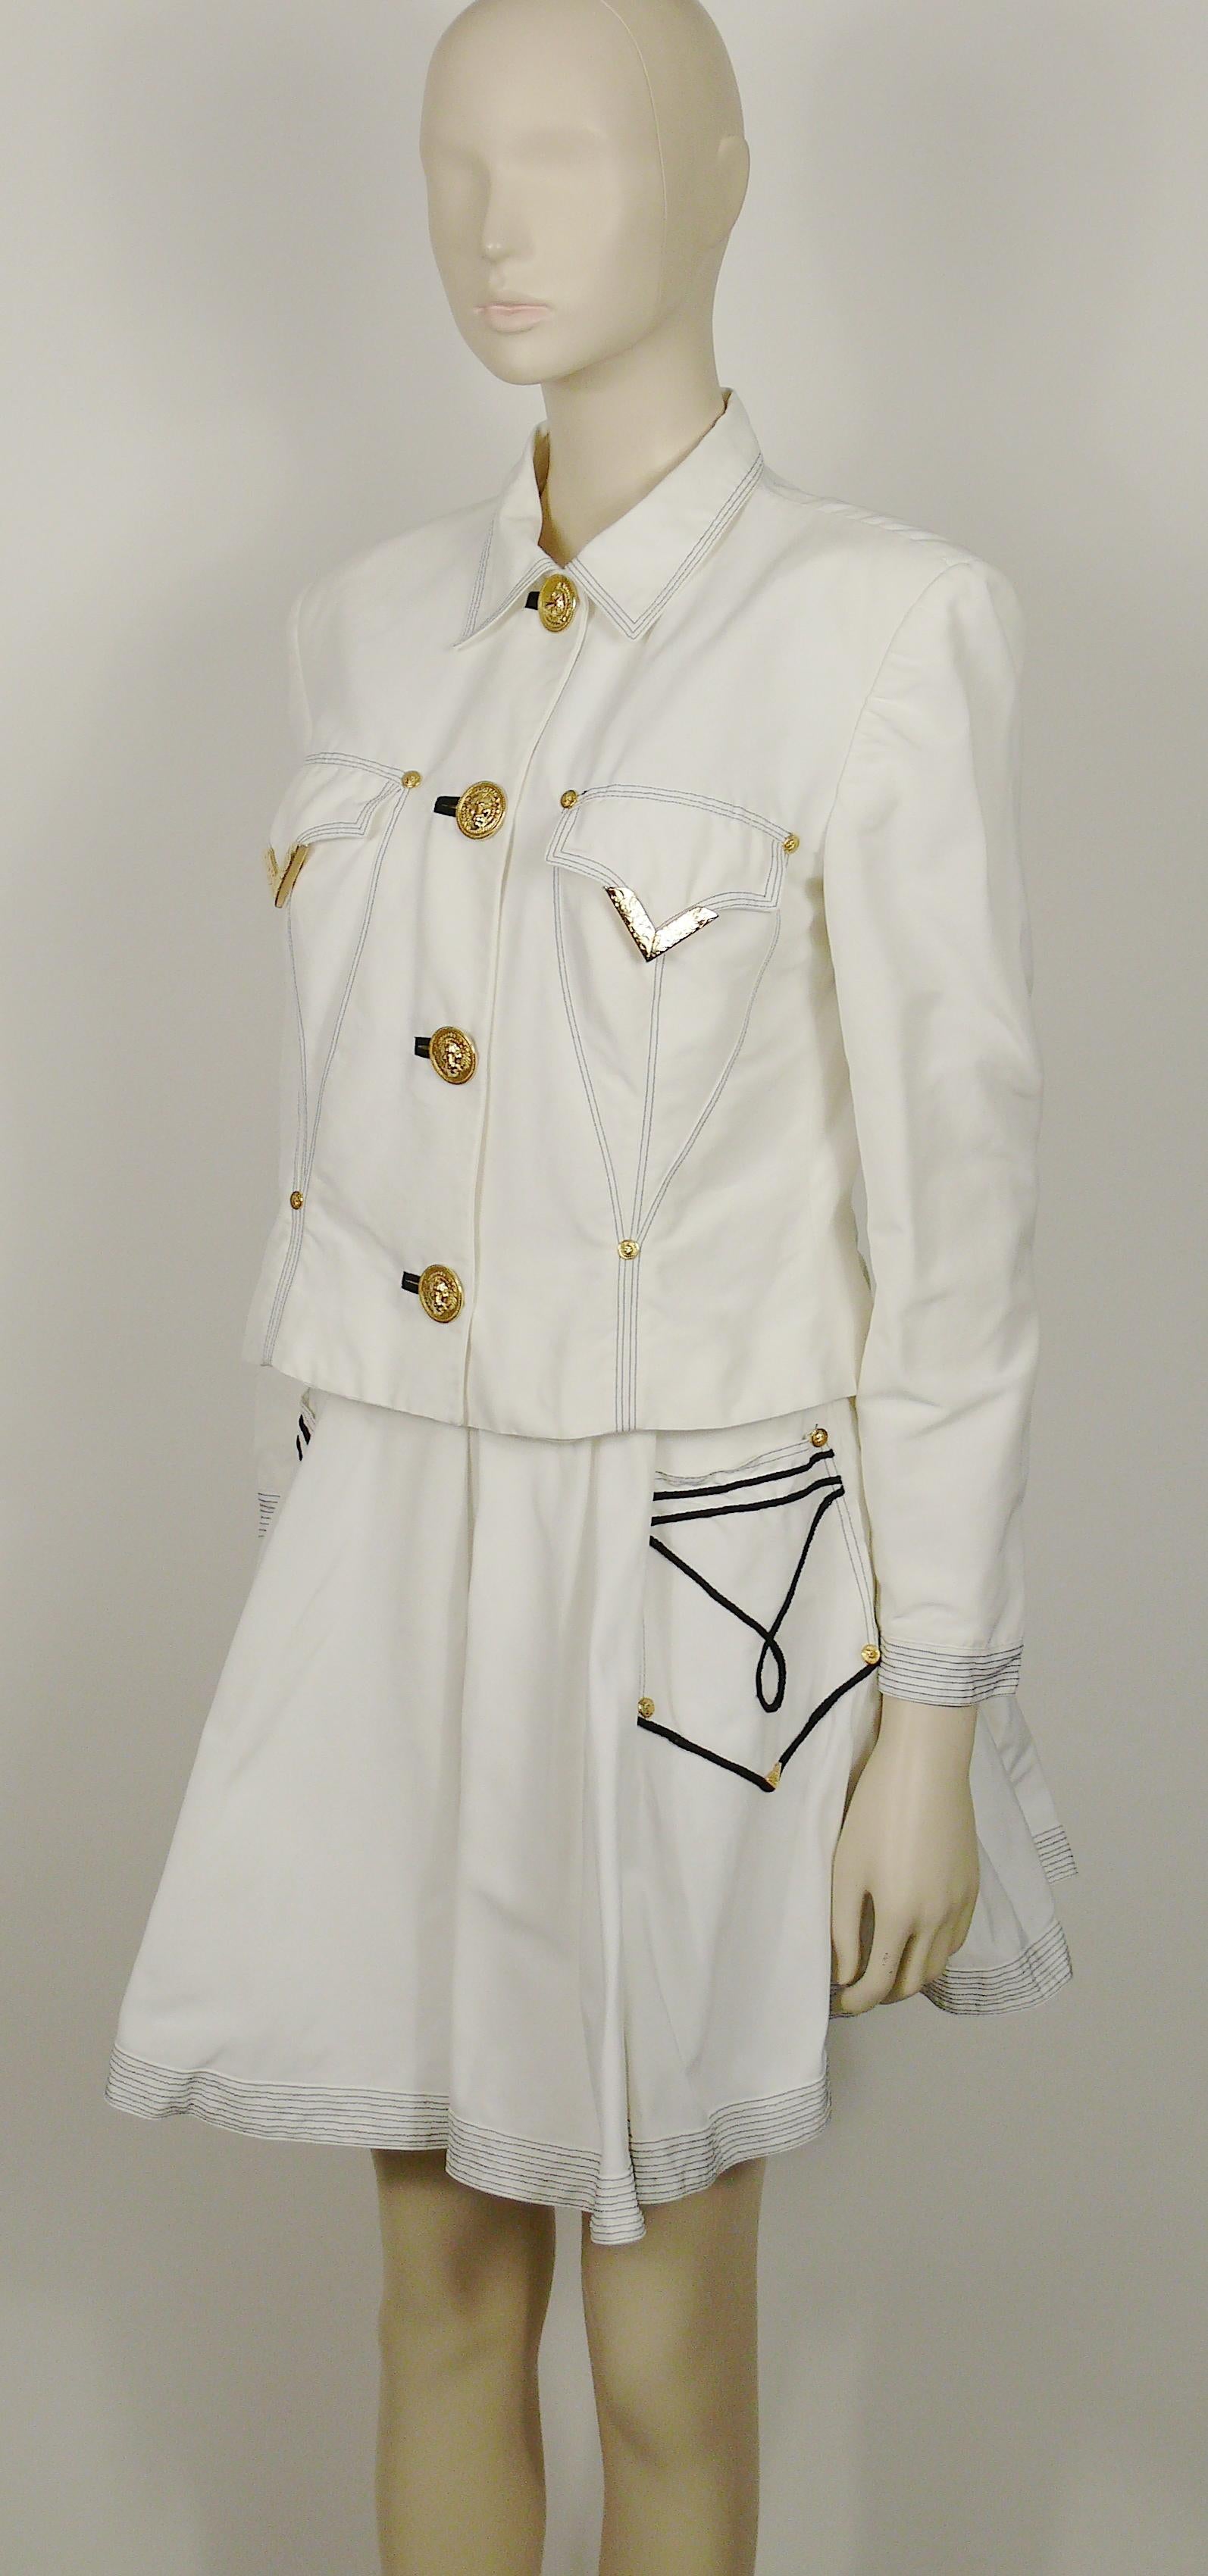 Gianni Versace Versus Vintage White Jacket & Skirt Ensemble with Western Details In Good Condition For Sale In Nice, FR